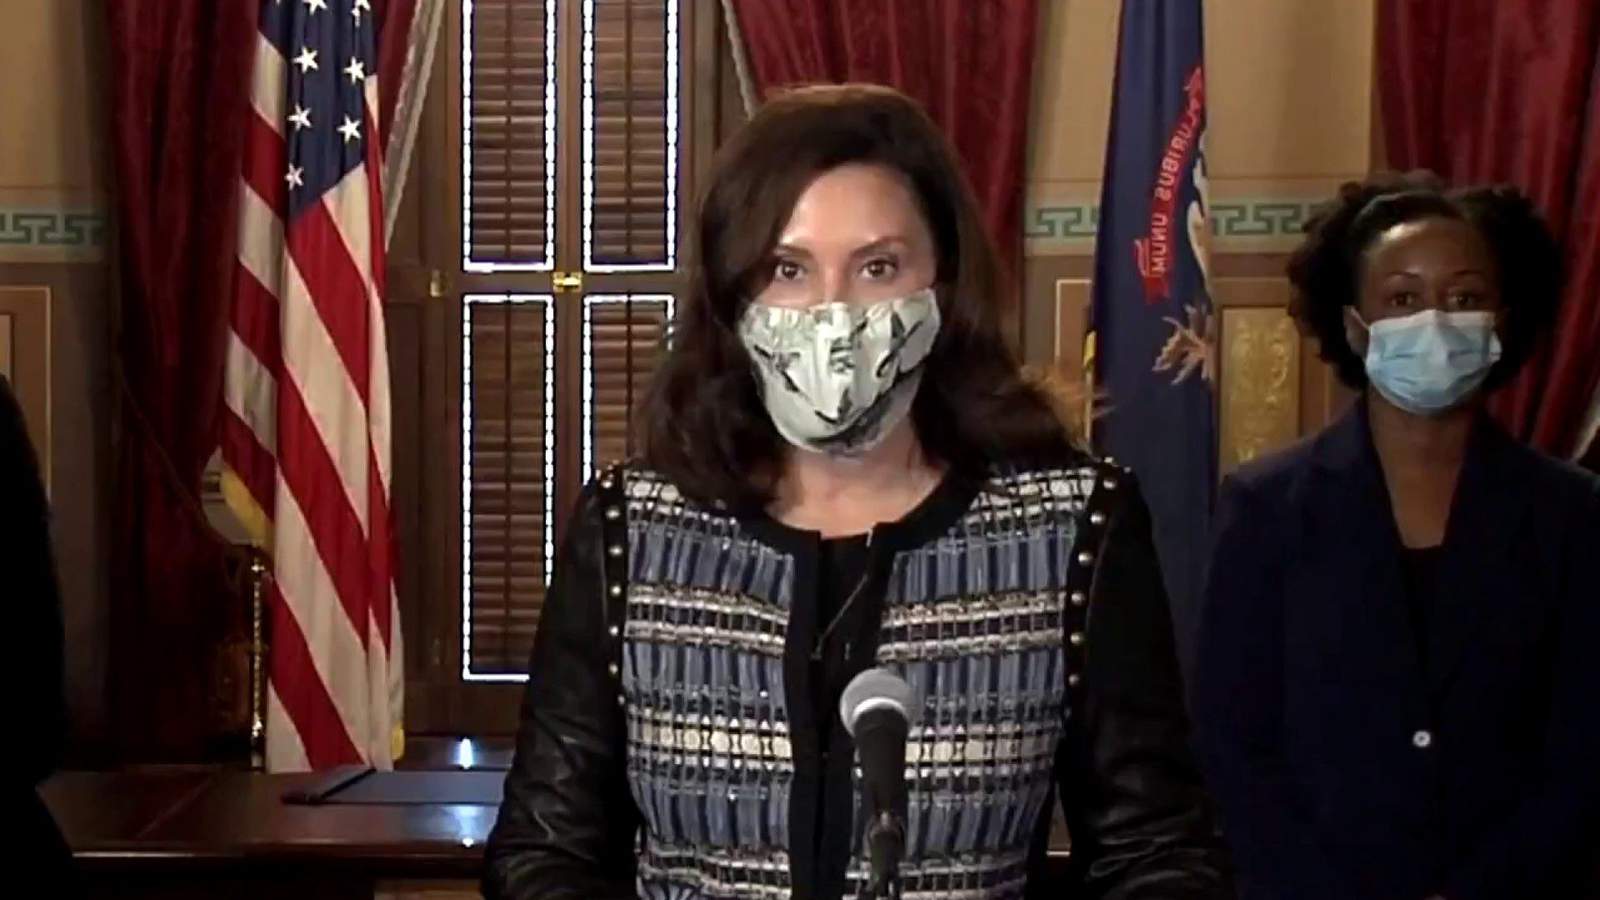 Live stream: Michigan Gov. Whitmer holds COVID-19 briefing after start of new restriction period